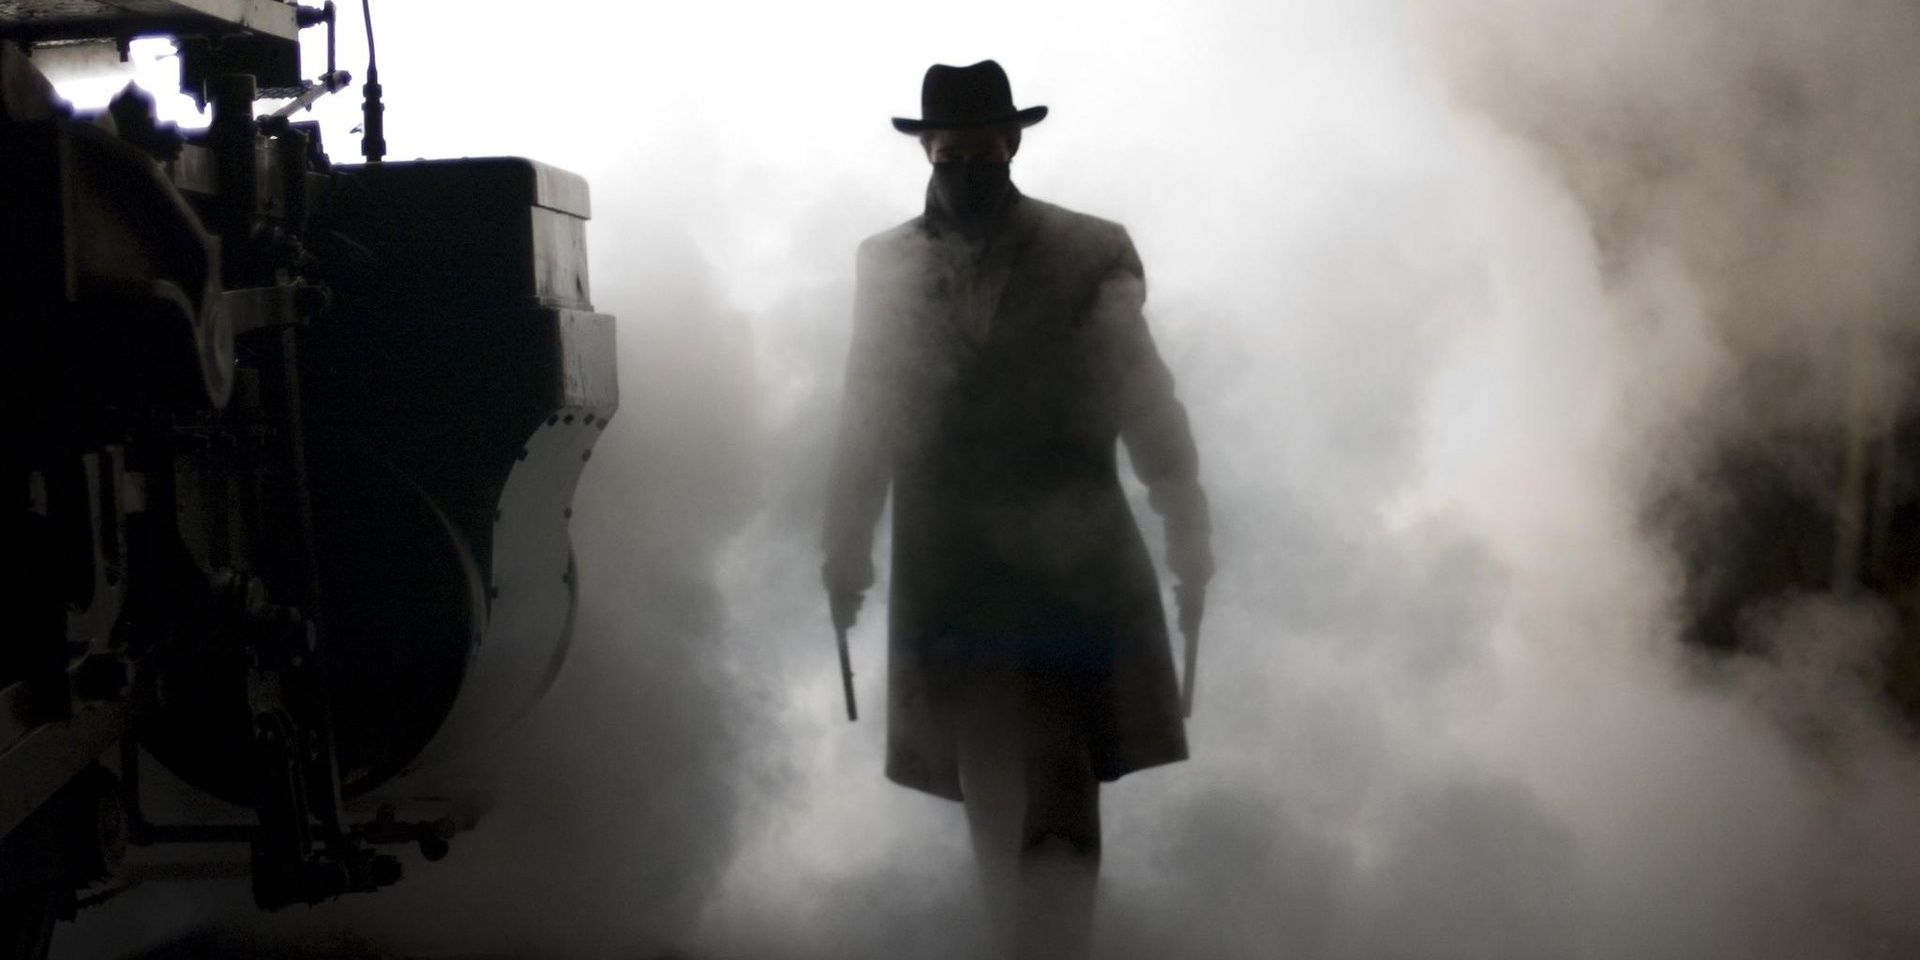 A cowboy emerging from smoke in The Assassination Of Jesse James By The Coward Robert Ford